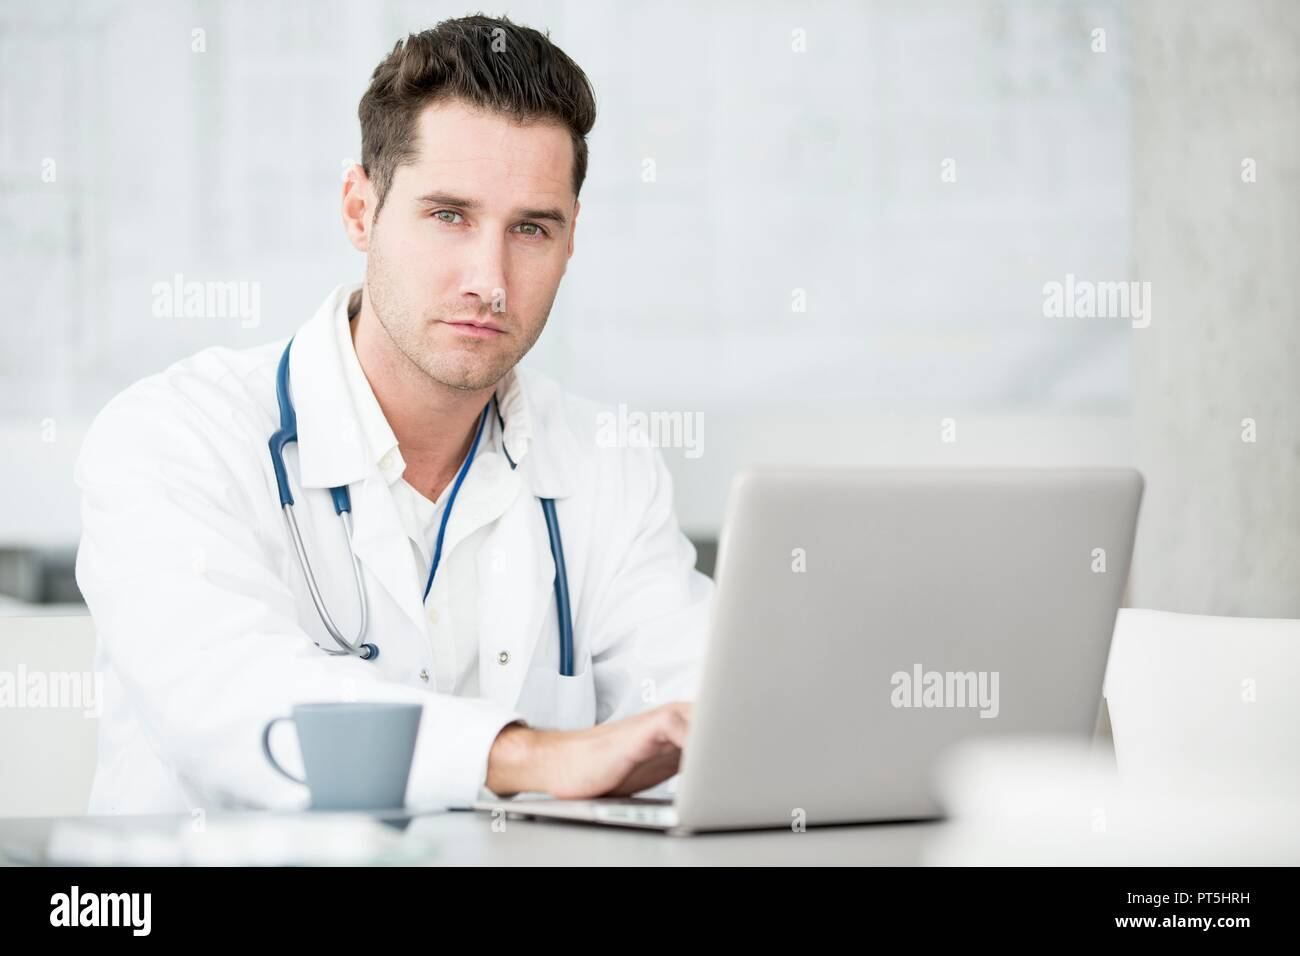 Portrait of mature male doctor using laptop. Stock Photo